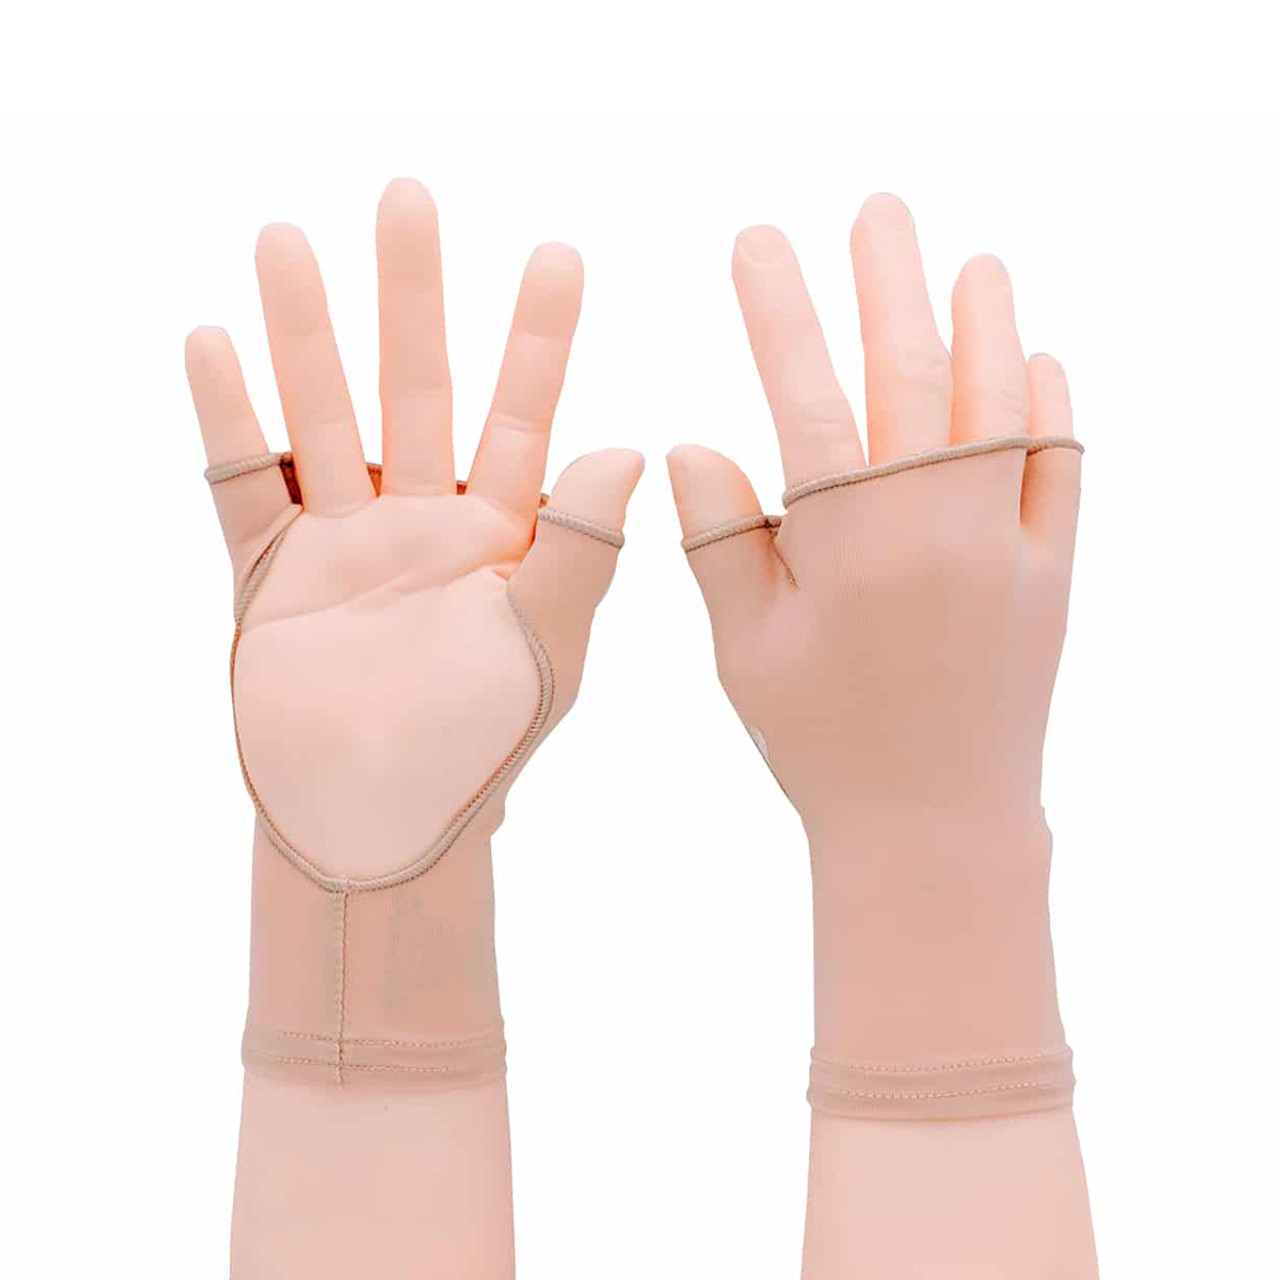 https://cdn11.bigcommerce.com/s-jmhyu0/images/stencil/1280x1280/products/104/1461/Sun_Gloves_Ginger_Nude_1200x1200__88879.1673293527.jpg?c=2